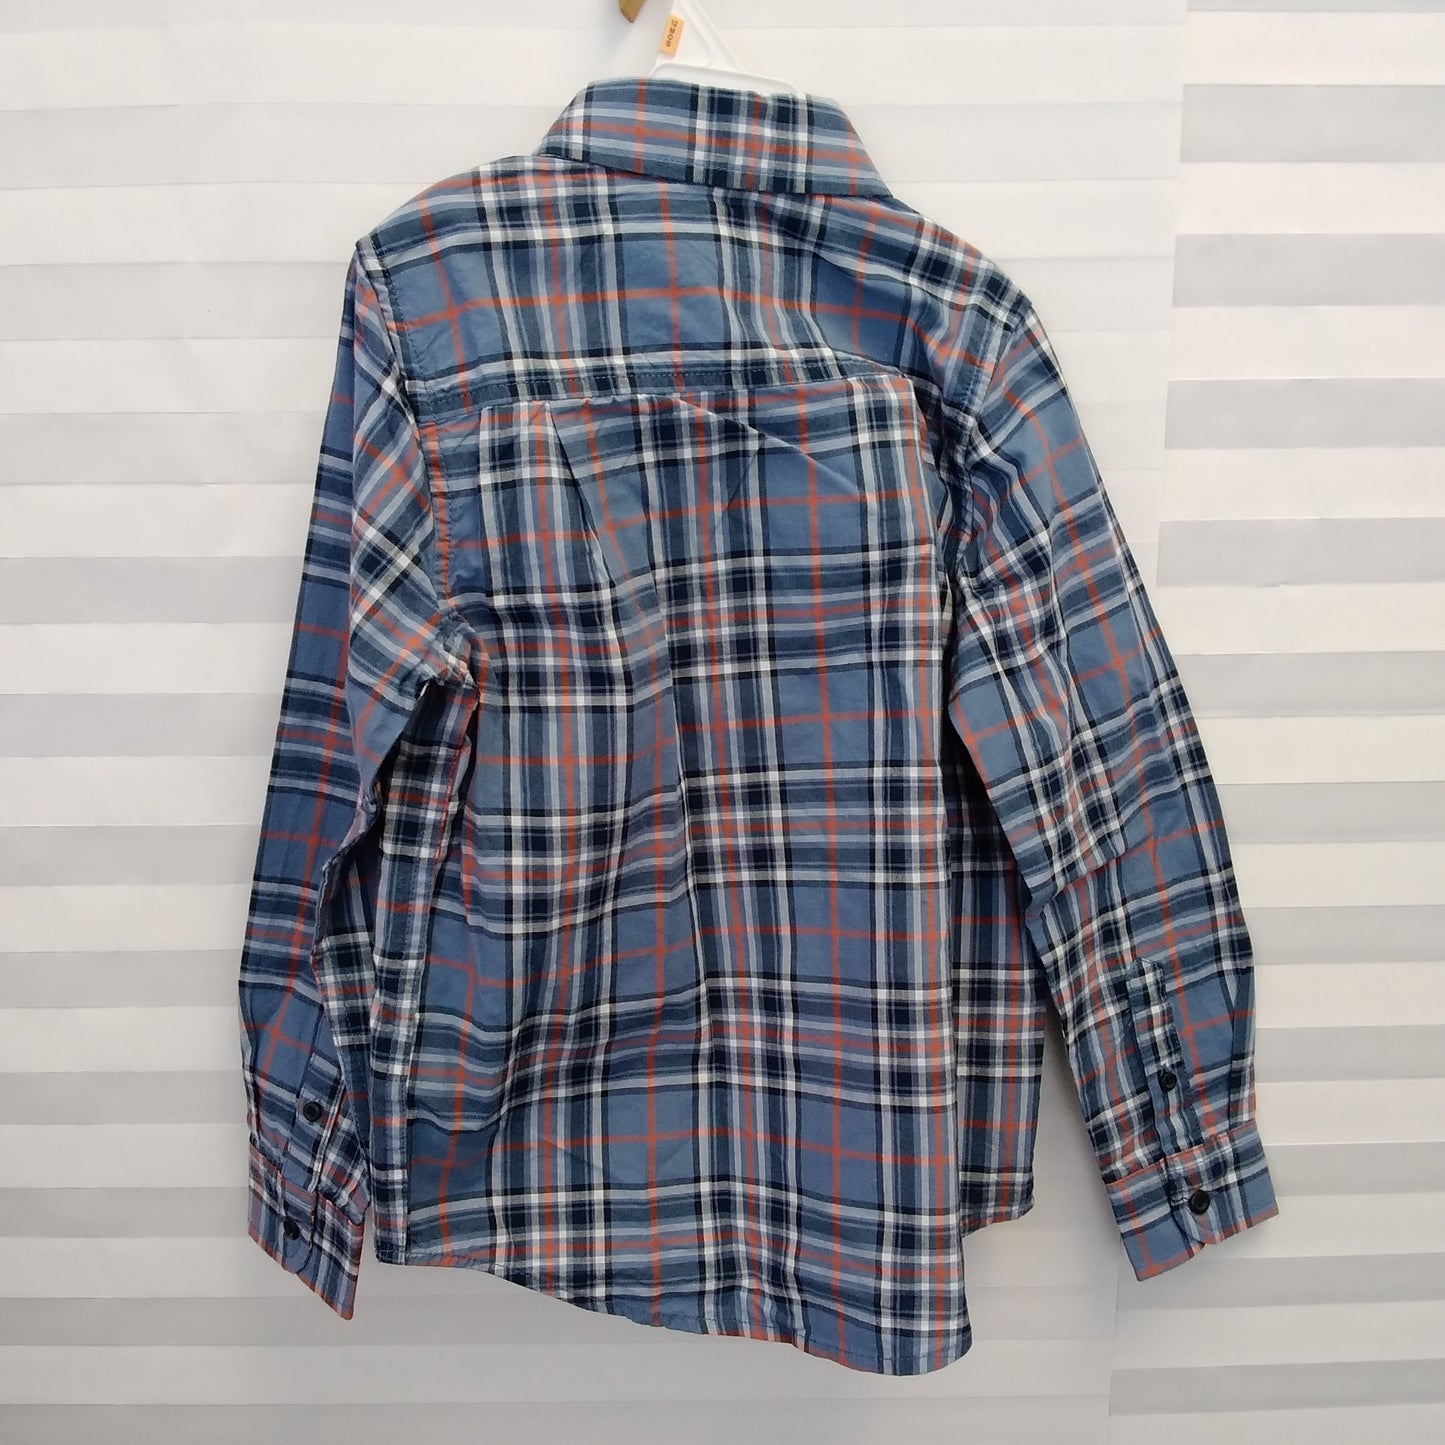 NWT - The Children's Place Blue Plaid Long Sleeve Button Down Shirt - S | 5-6